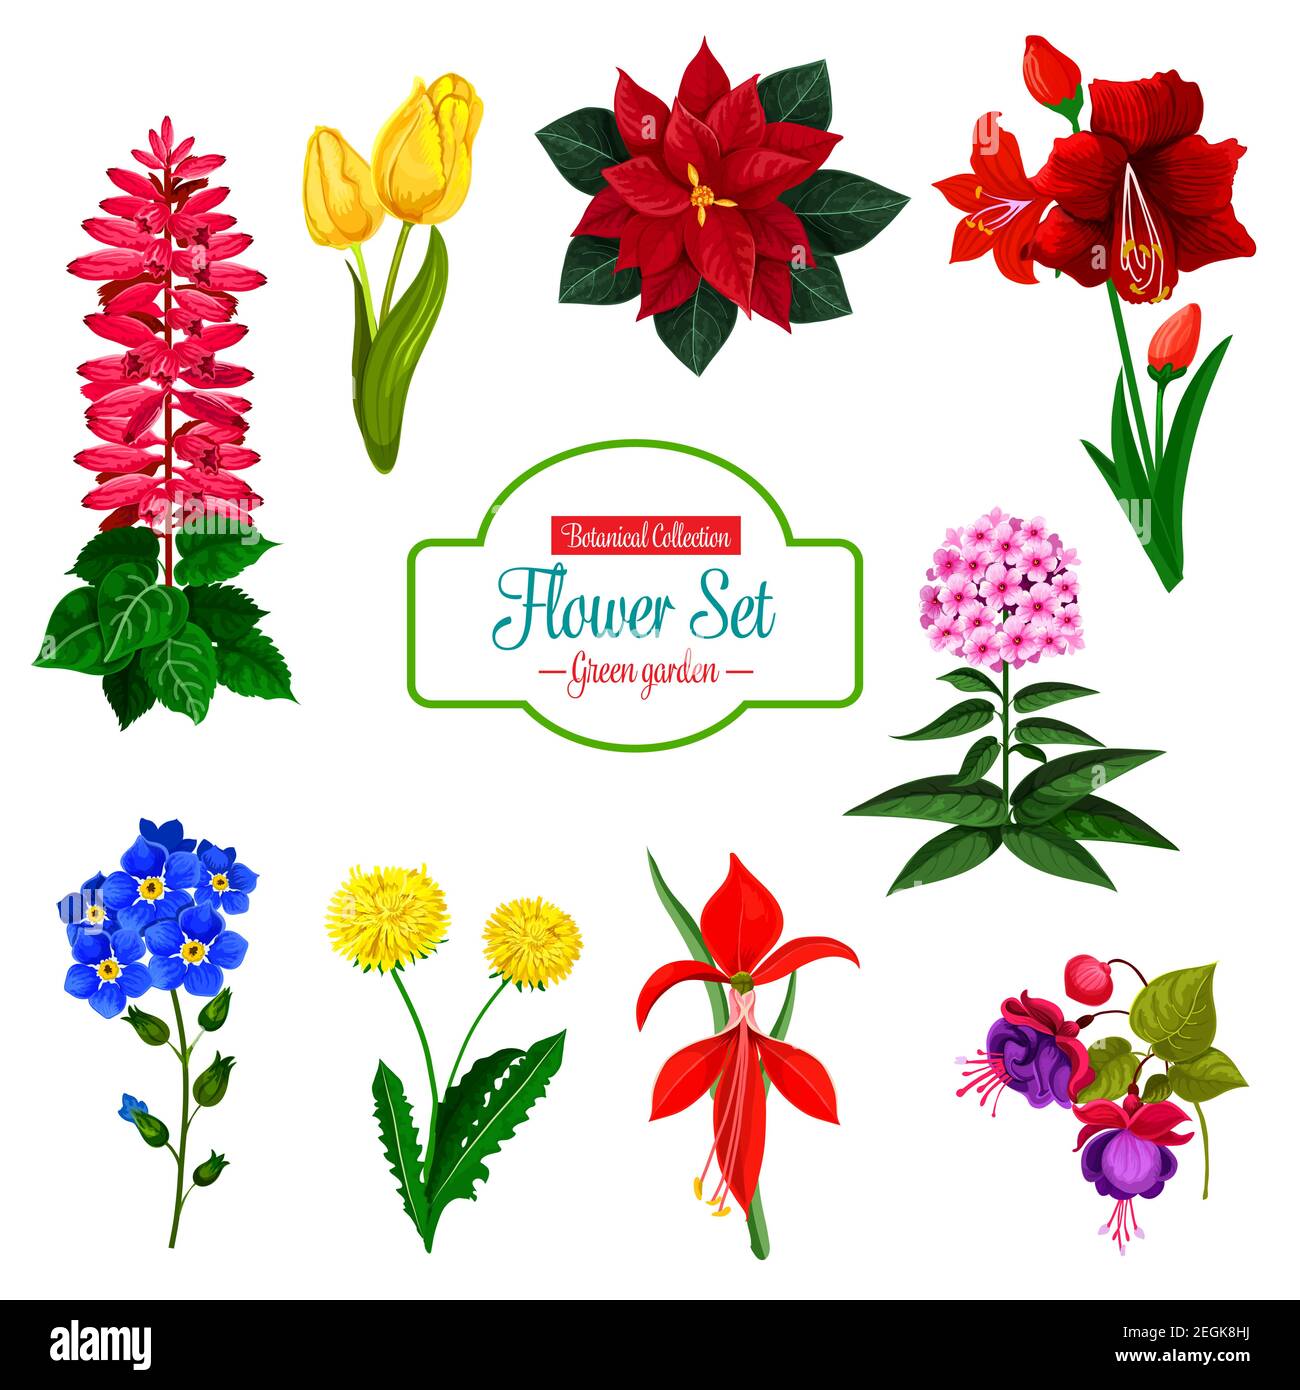 Flower icon set of spring garden and house flowering plant. Tulip, dandelion and phlox, forget-me-not, poinsettia and delphinium, hippeastrum, fuchsia Stock Vector